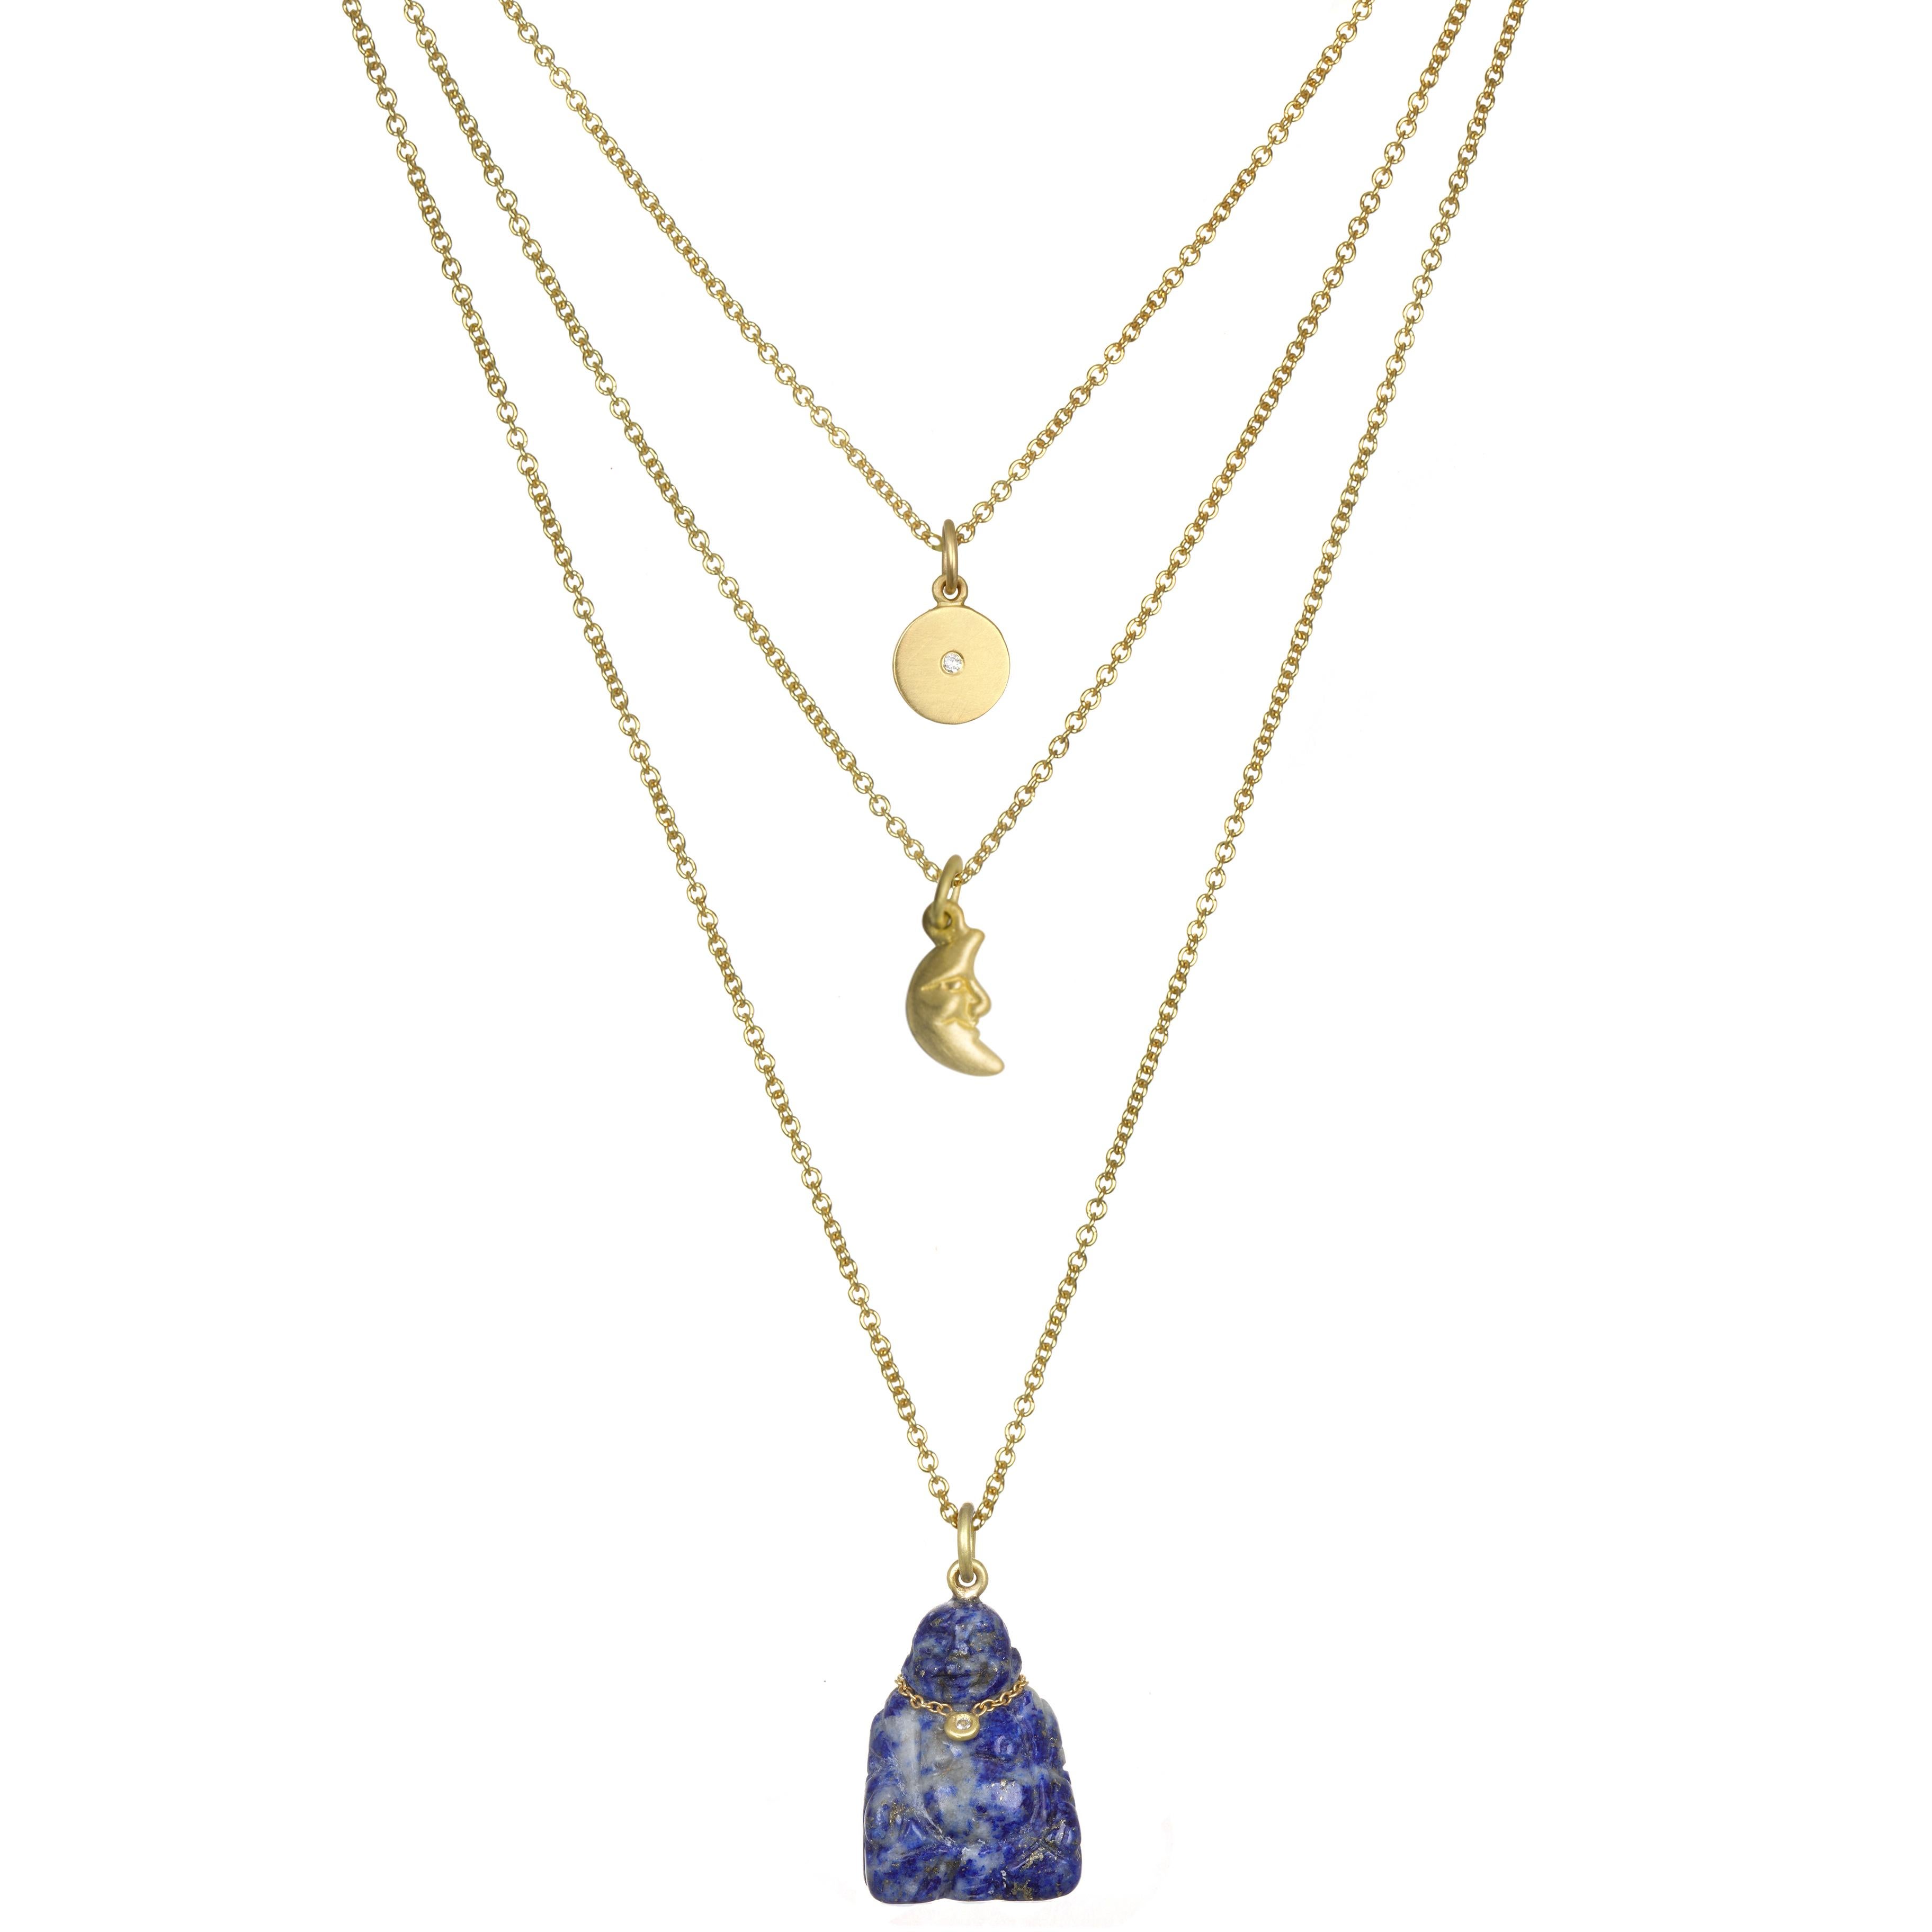 A symbol of longevity, enlightenment and love our Lapis buddha pendant is complete with its very own diamond necklace. It is sure to add a distinctive sparkle in your life! 
Cable chain 16